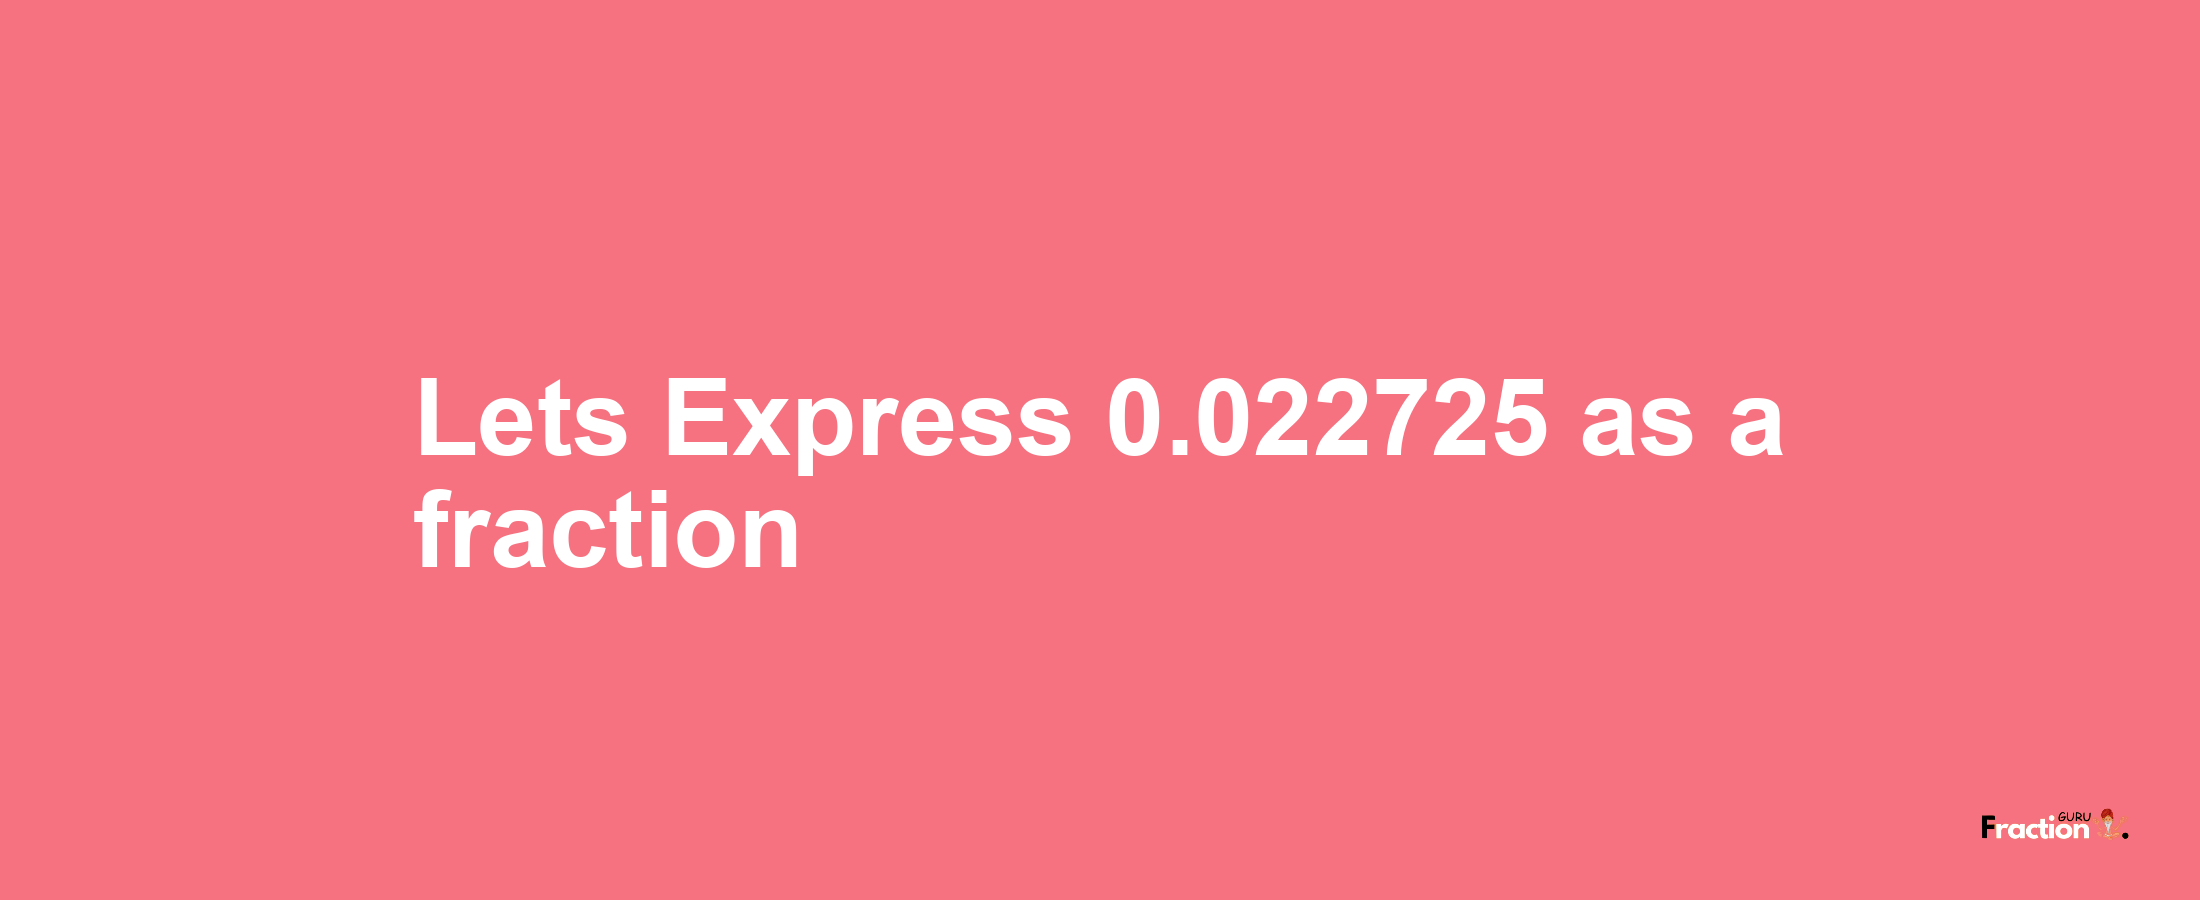 Lets Express 0.022725 as afraction